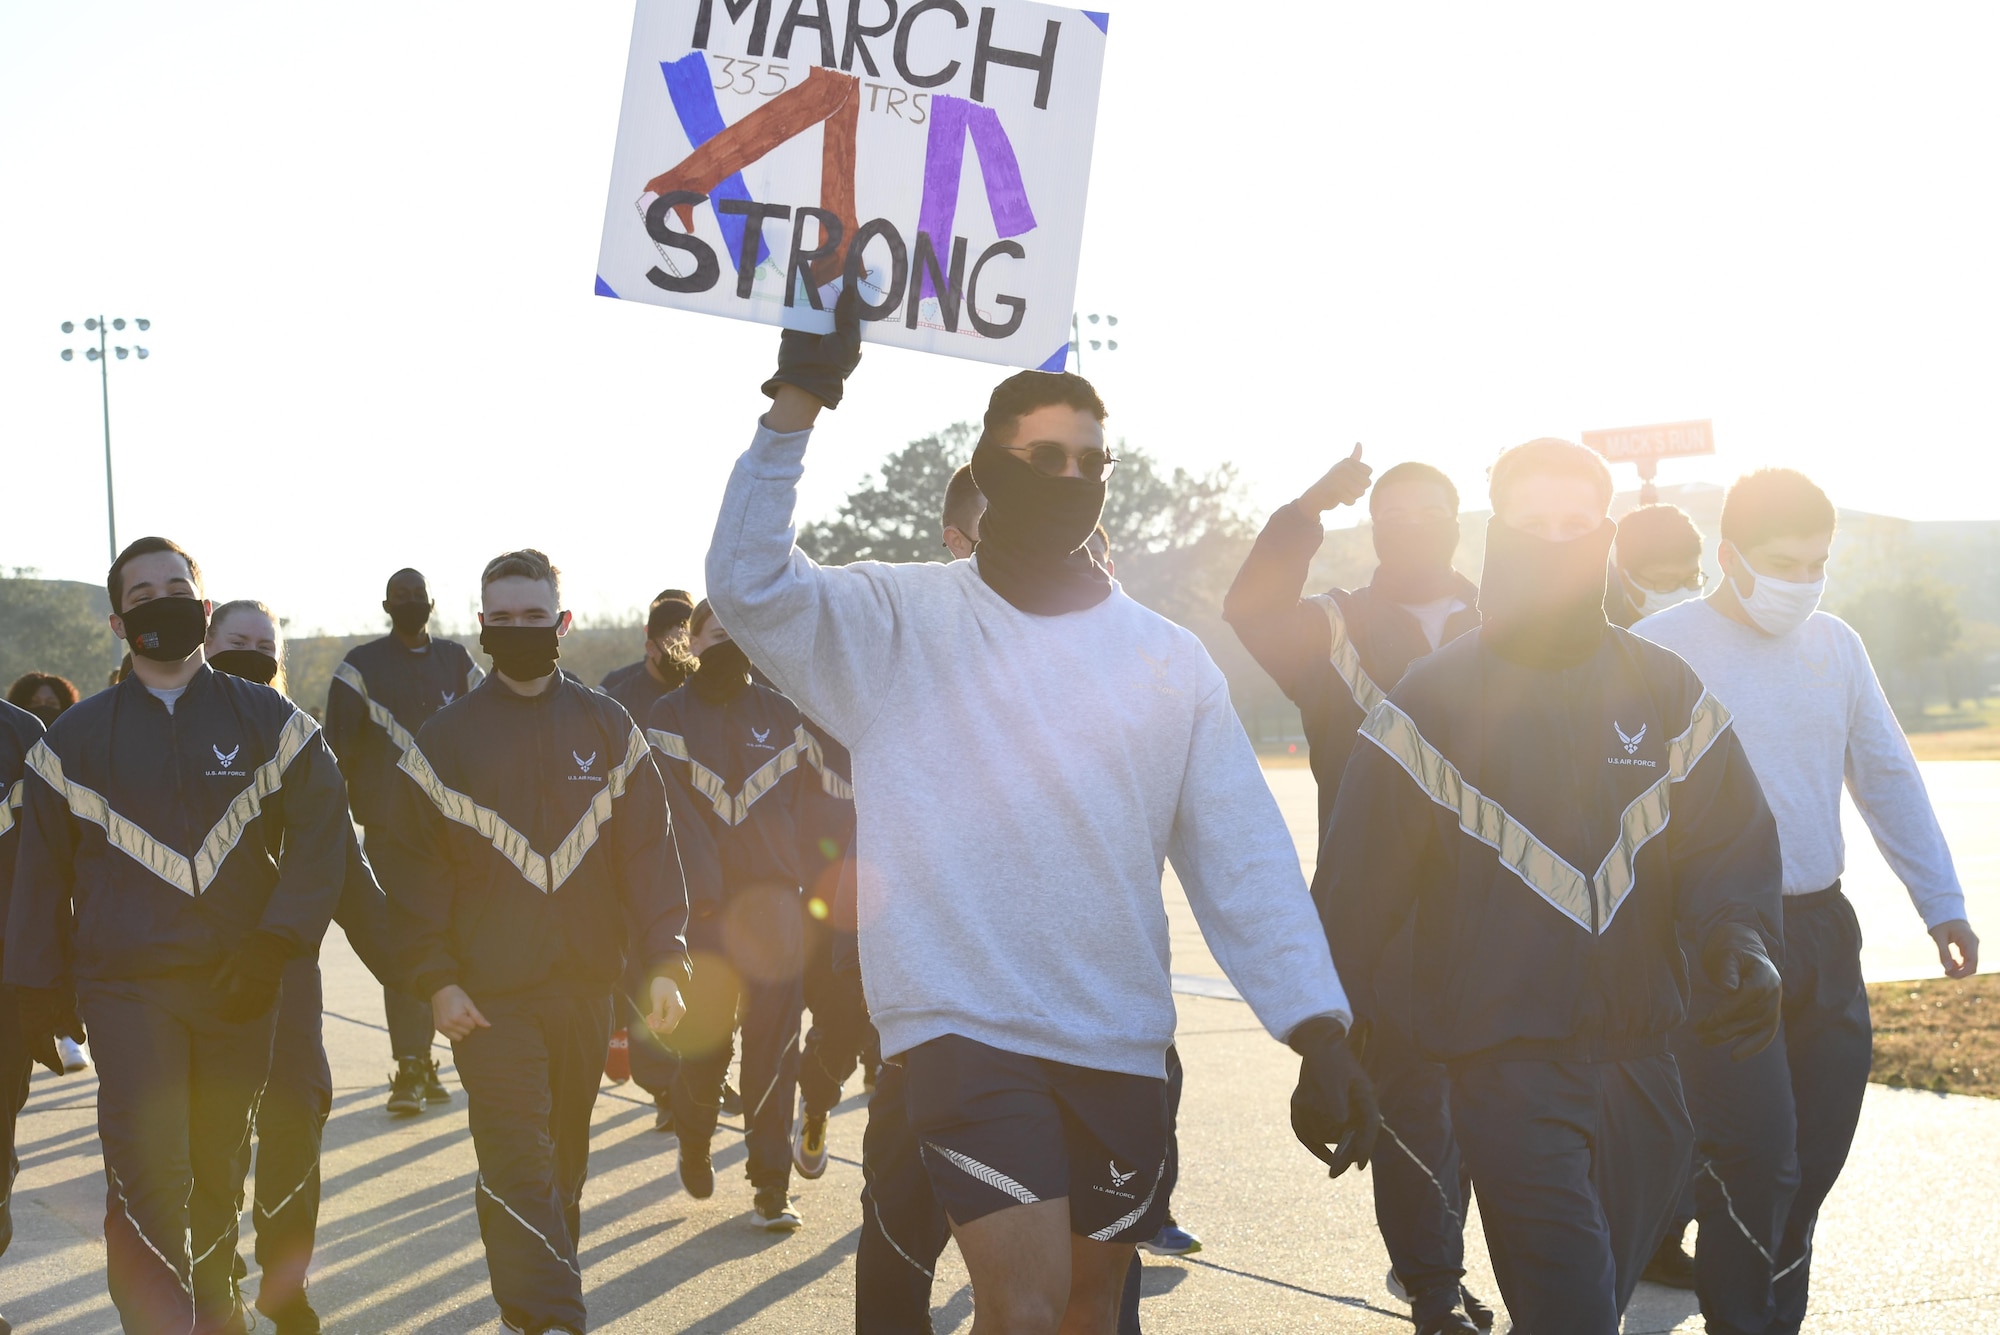 Airmen from the 81st Training Group participate in the Dragon March on the Levitow Training Support Facility drill pad at Keesler Air Force Base, Mississippi, Dec. 8, 2020. The theme of the three-mile walk was "Stronger Together." (U.S. Air Force photo by Kemberly Groue)